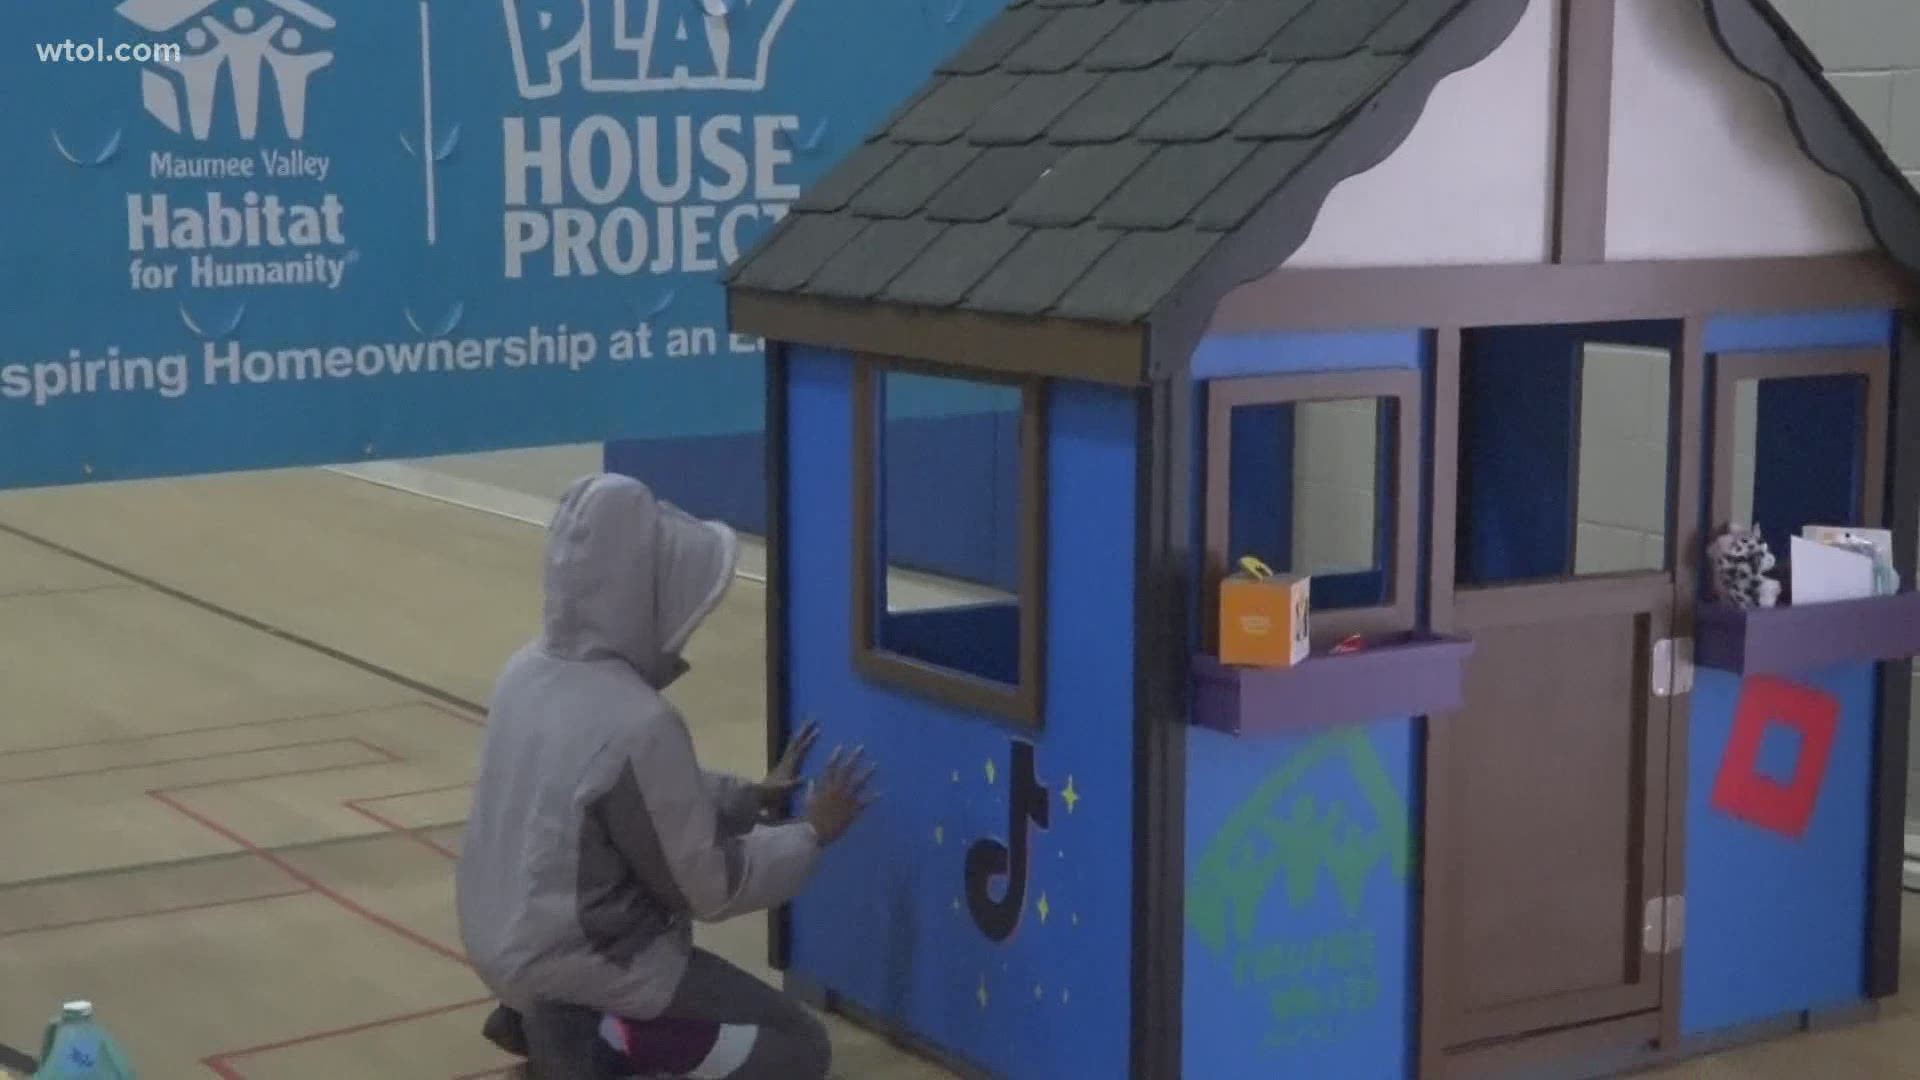 St. Joseph Parish School in Sylvania took a day off from learning to get their hands dirty with Habitat for Humanity by building a playhouse for a young girl.